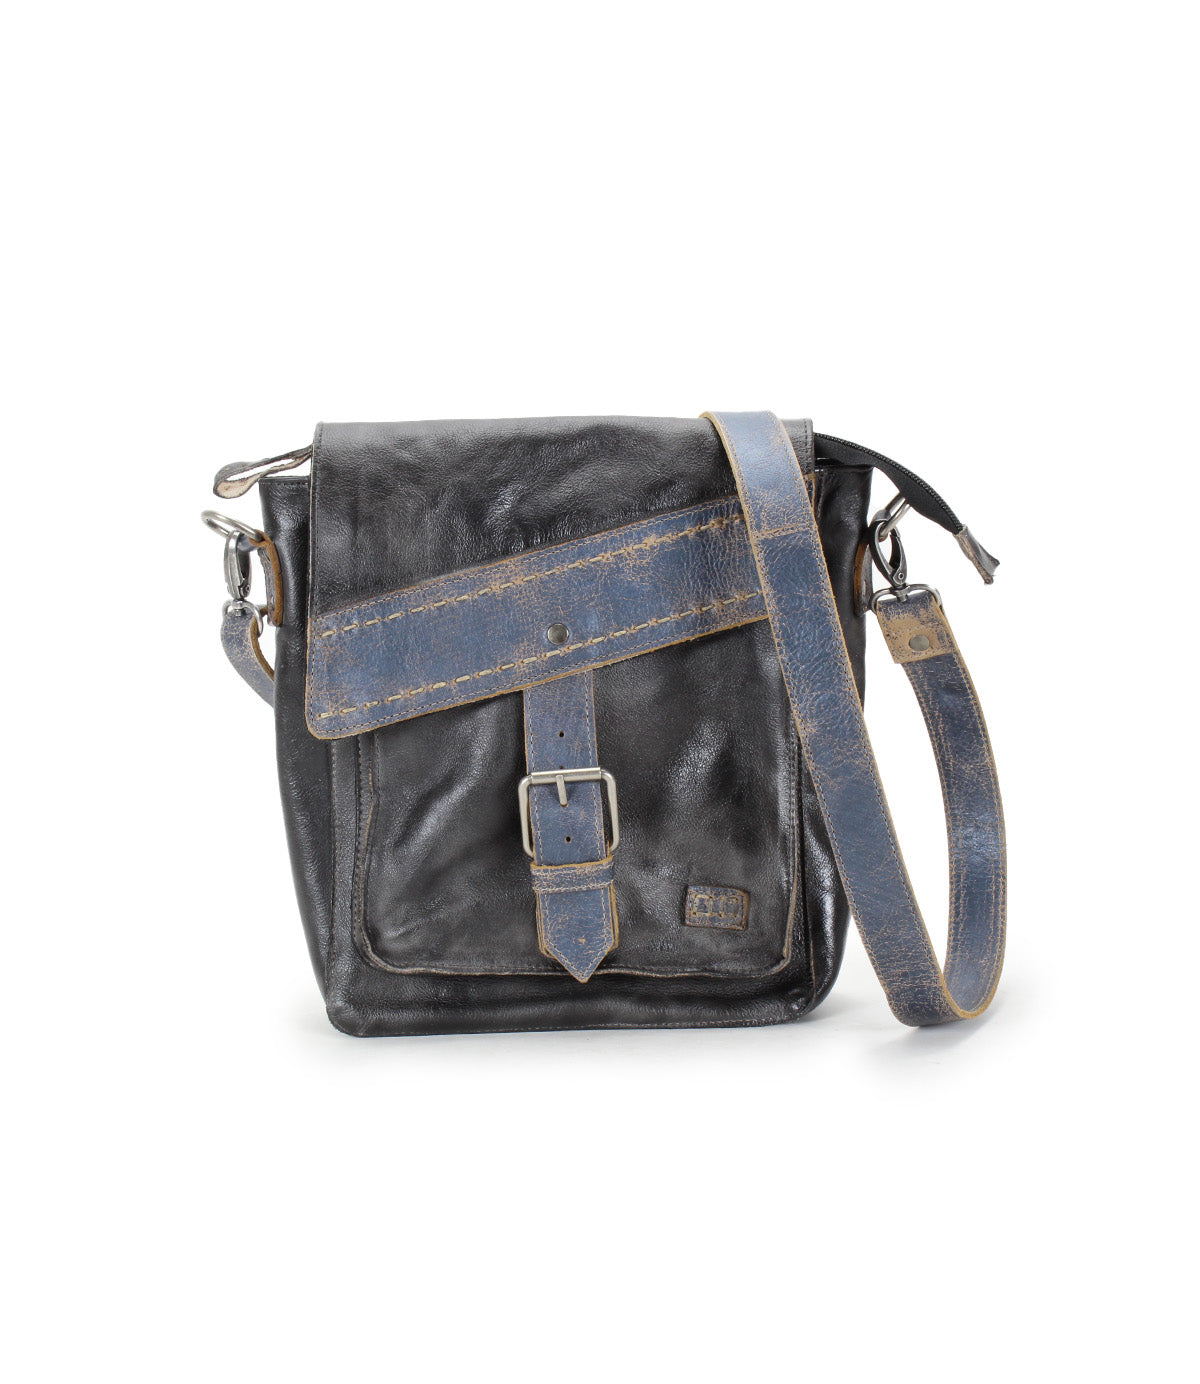 A Bed Stu Ainhoa LTC leather messenger bag with an adjustable blue denim strap and buckle closure, isolated on a white background.